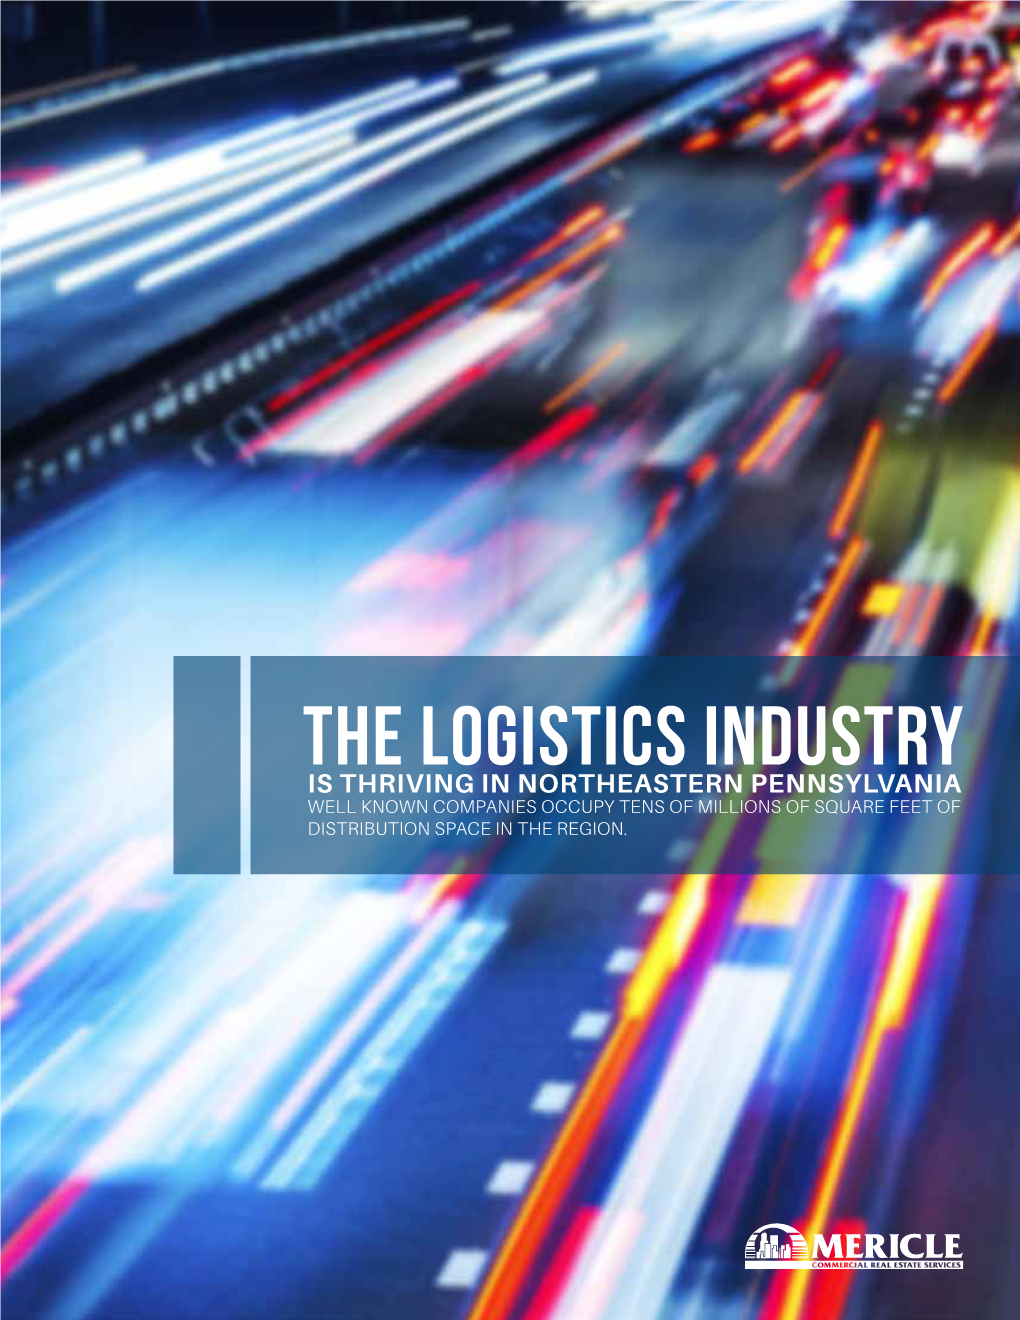 The LOGISTICS INDUSTRY IS THRIVING in NORTHEASTERN PENNSYLVANIA WELL KNOWN COMPANIES OCCUPY TENS of MILLIONS of SQUARE FEET of DISTRIBUTION SPACE in the REGION